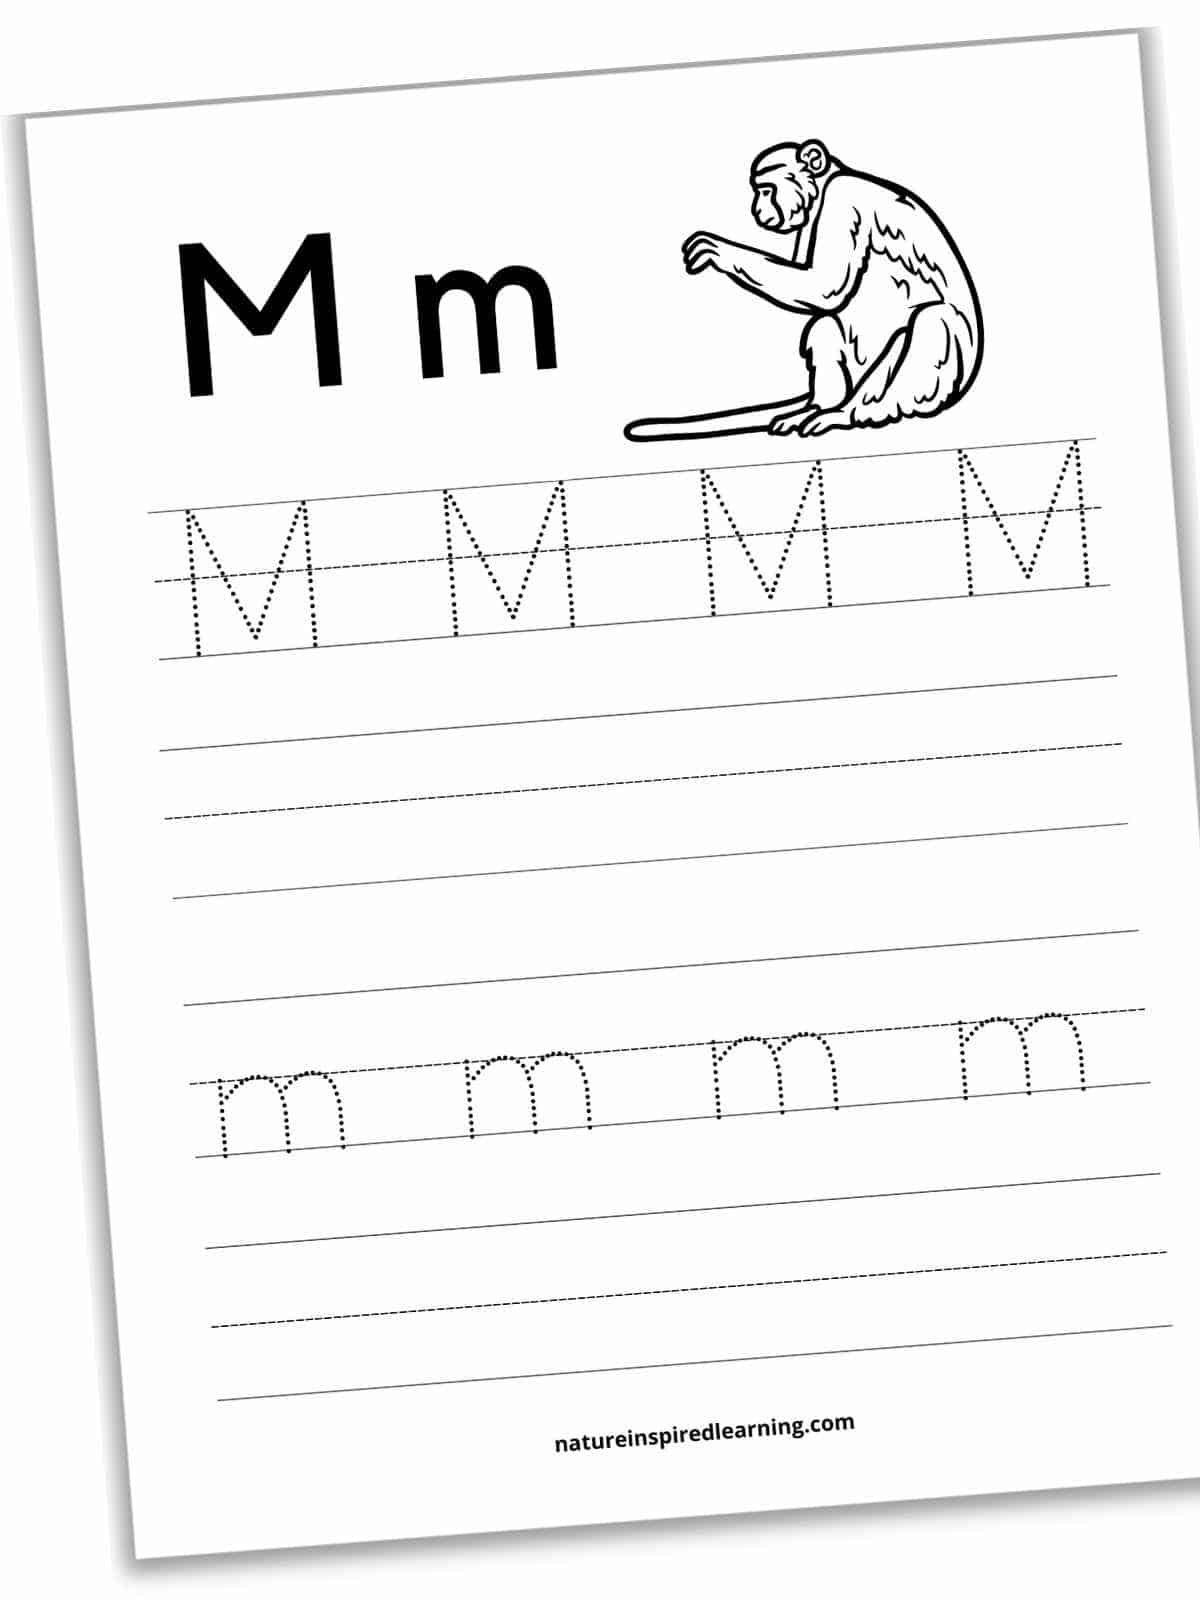 Black and white worksheet with M and m in bold next to a sitting monkey. Four sets of lines, four traceable M's on the first set and four dotted m's on the third set. Second and fourth sets of lines are blank.